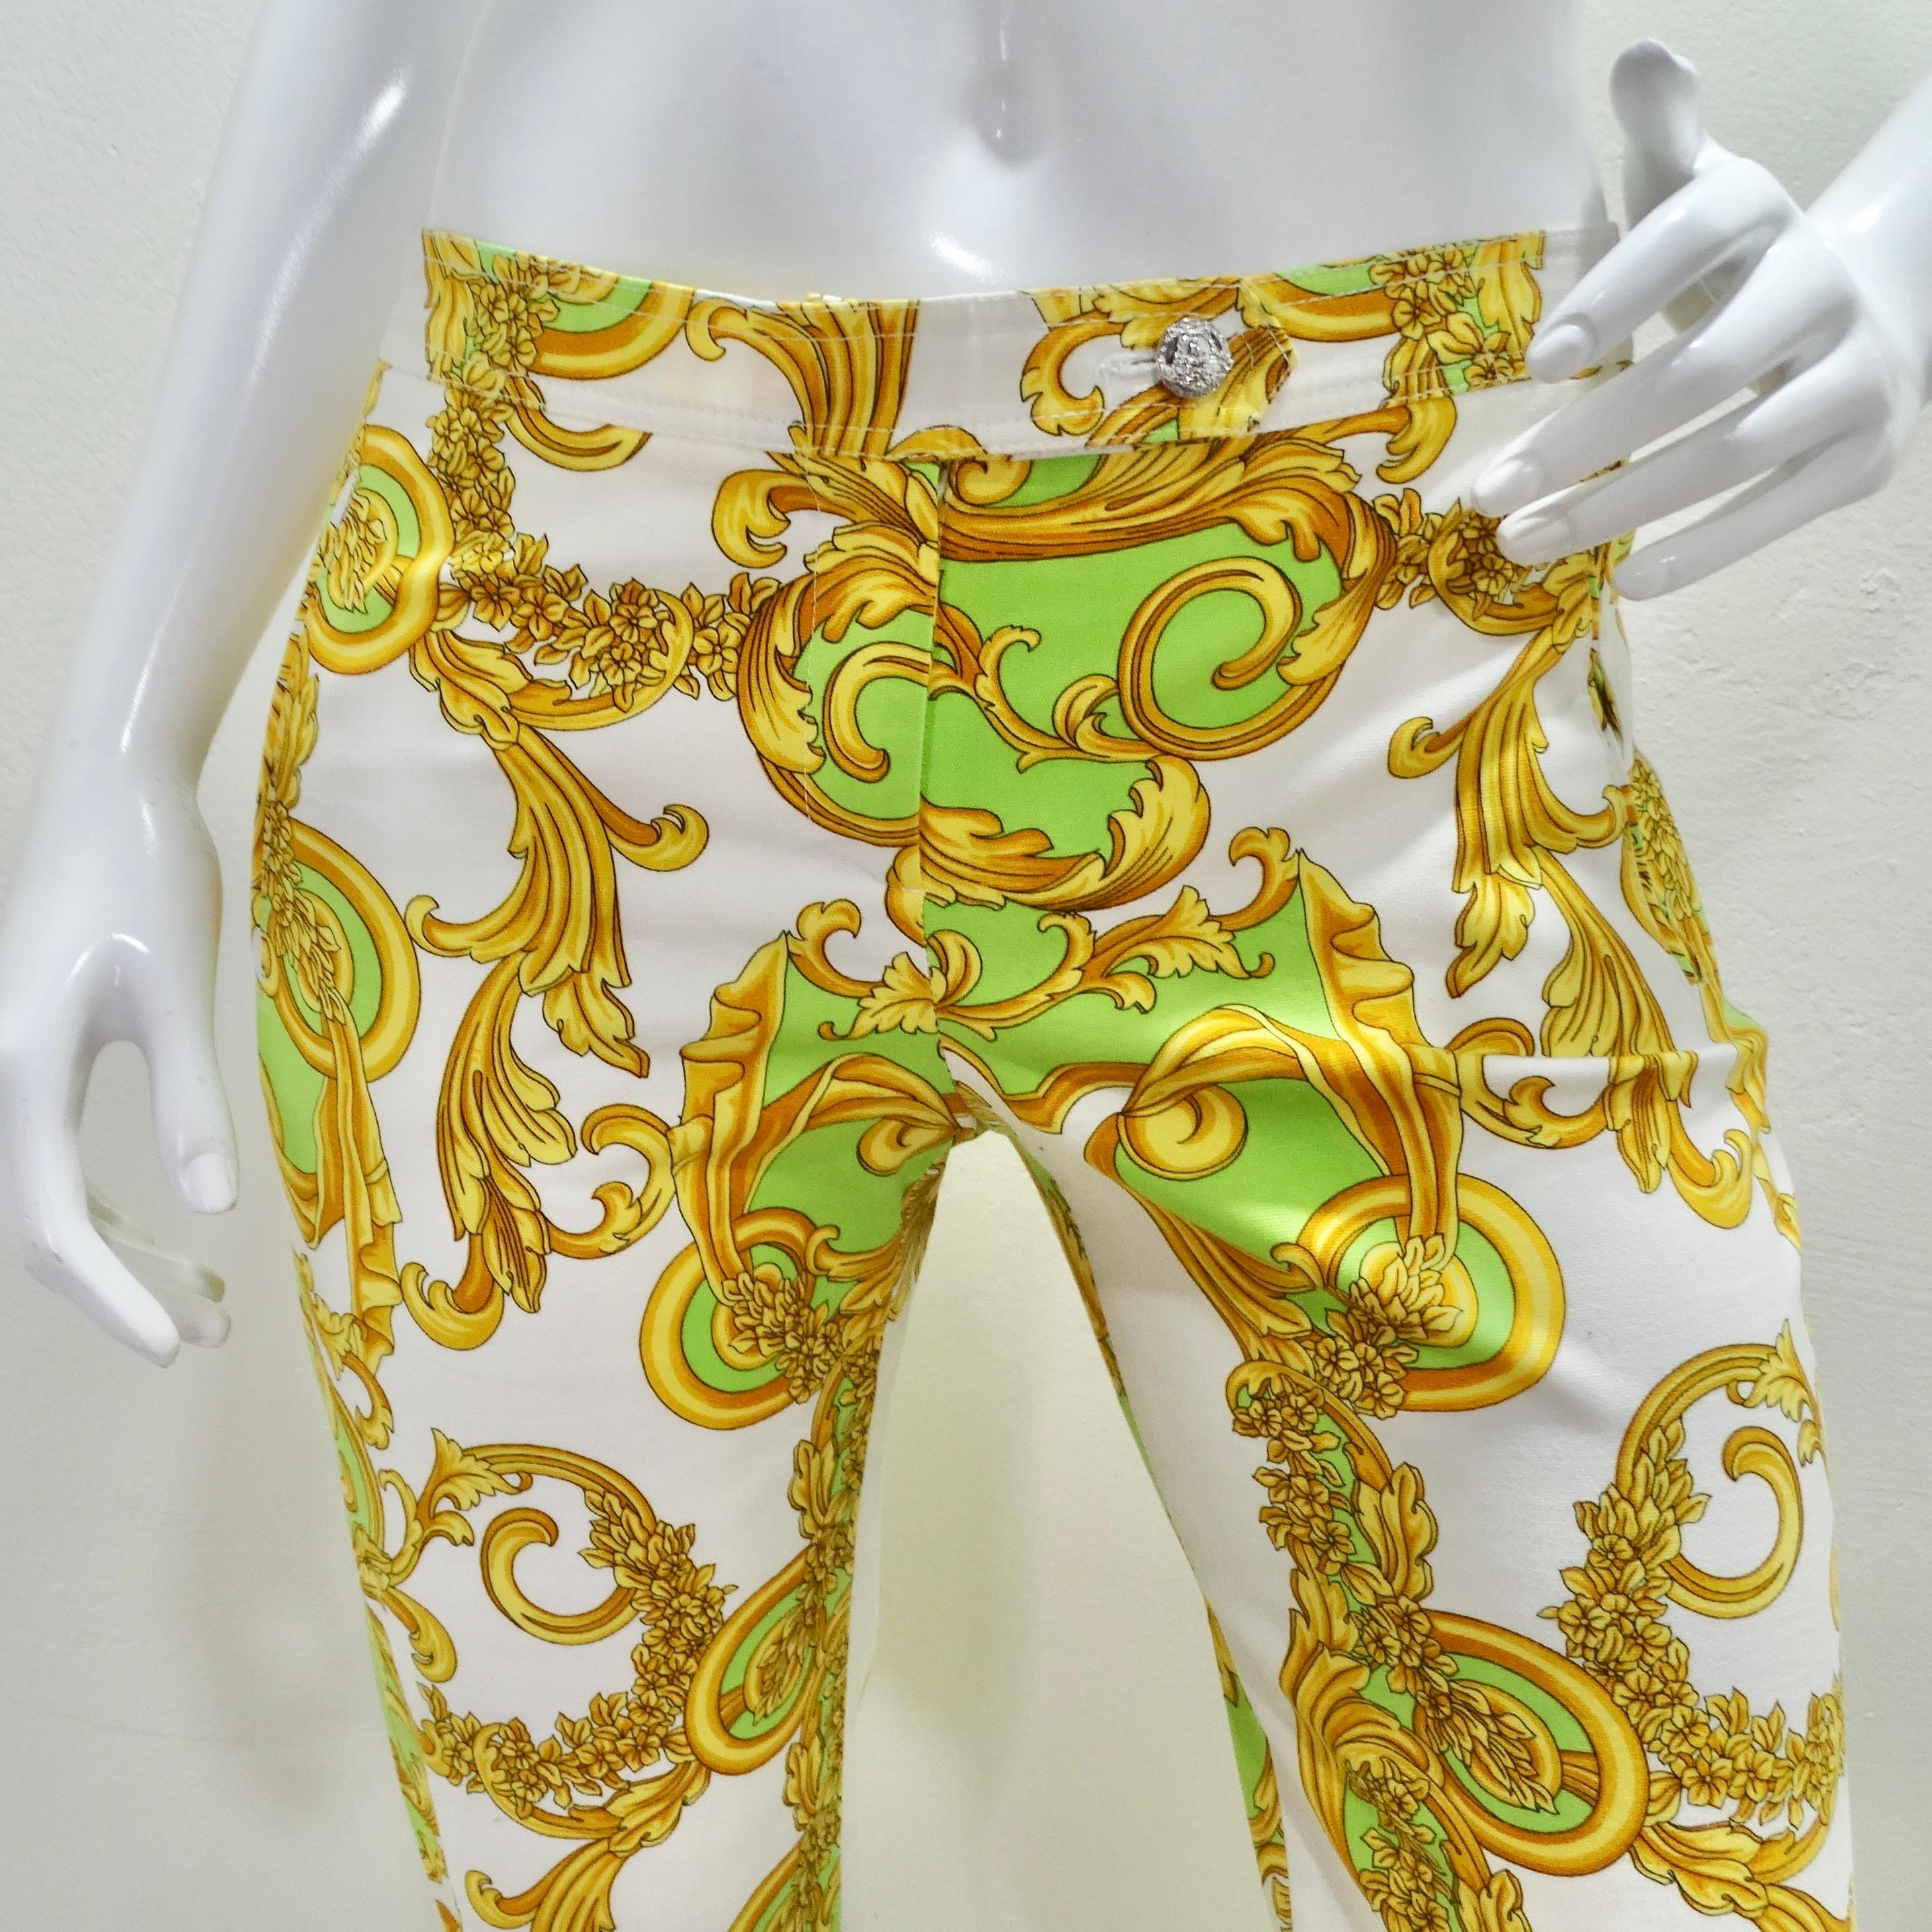 If it ain't Baroque don't fix it! Rock some print with out 1990s Versace Baroque printed pants! Bright green, cream and gold swirling print on woven cotton pants. Mid rise fit with a slightly flared leg. Silver medusa head button closure at the